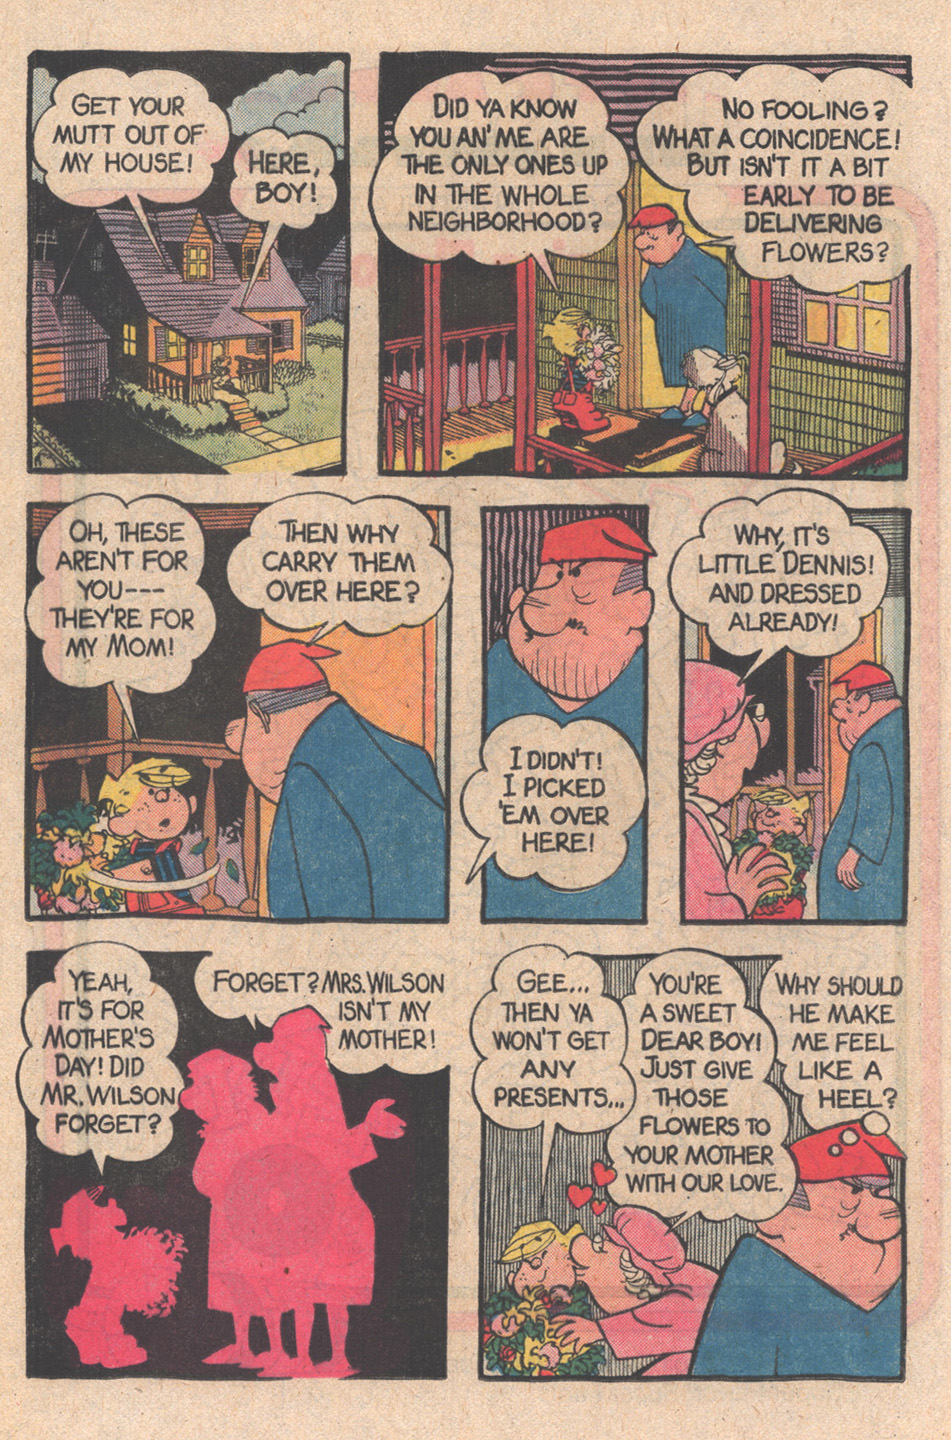 Denice The Menace Cartoon Porn - Dennis The Menace Issue 10 | Read Dennis The Menace Issue 10 comic online  in high quality. Read Full Comic online for free - Read comics online in  high quality .